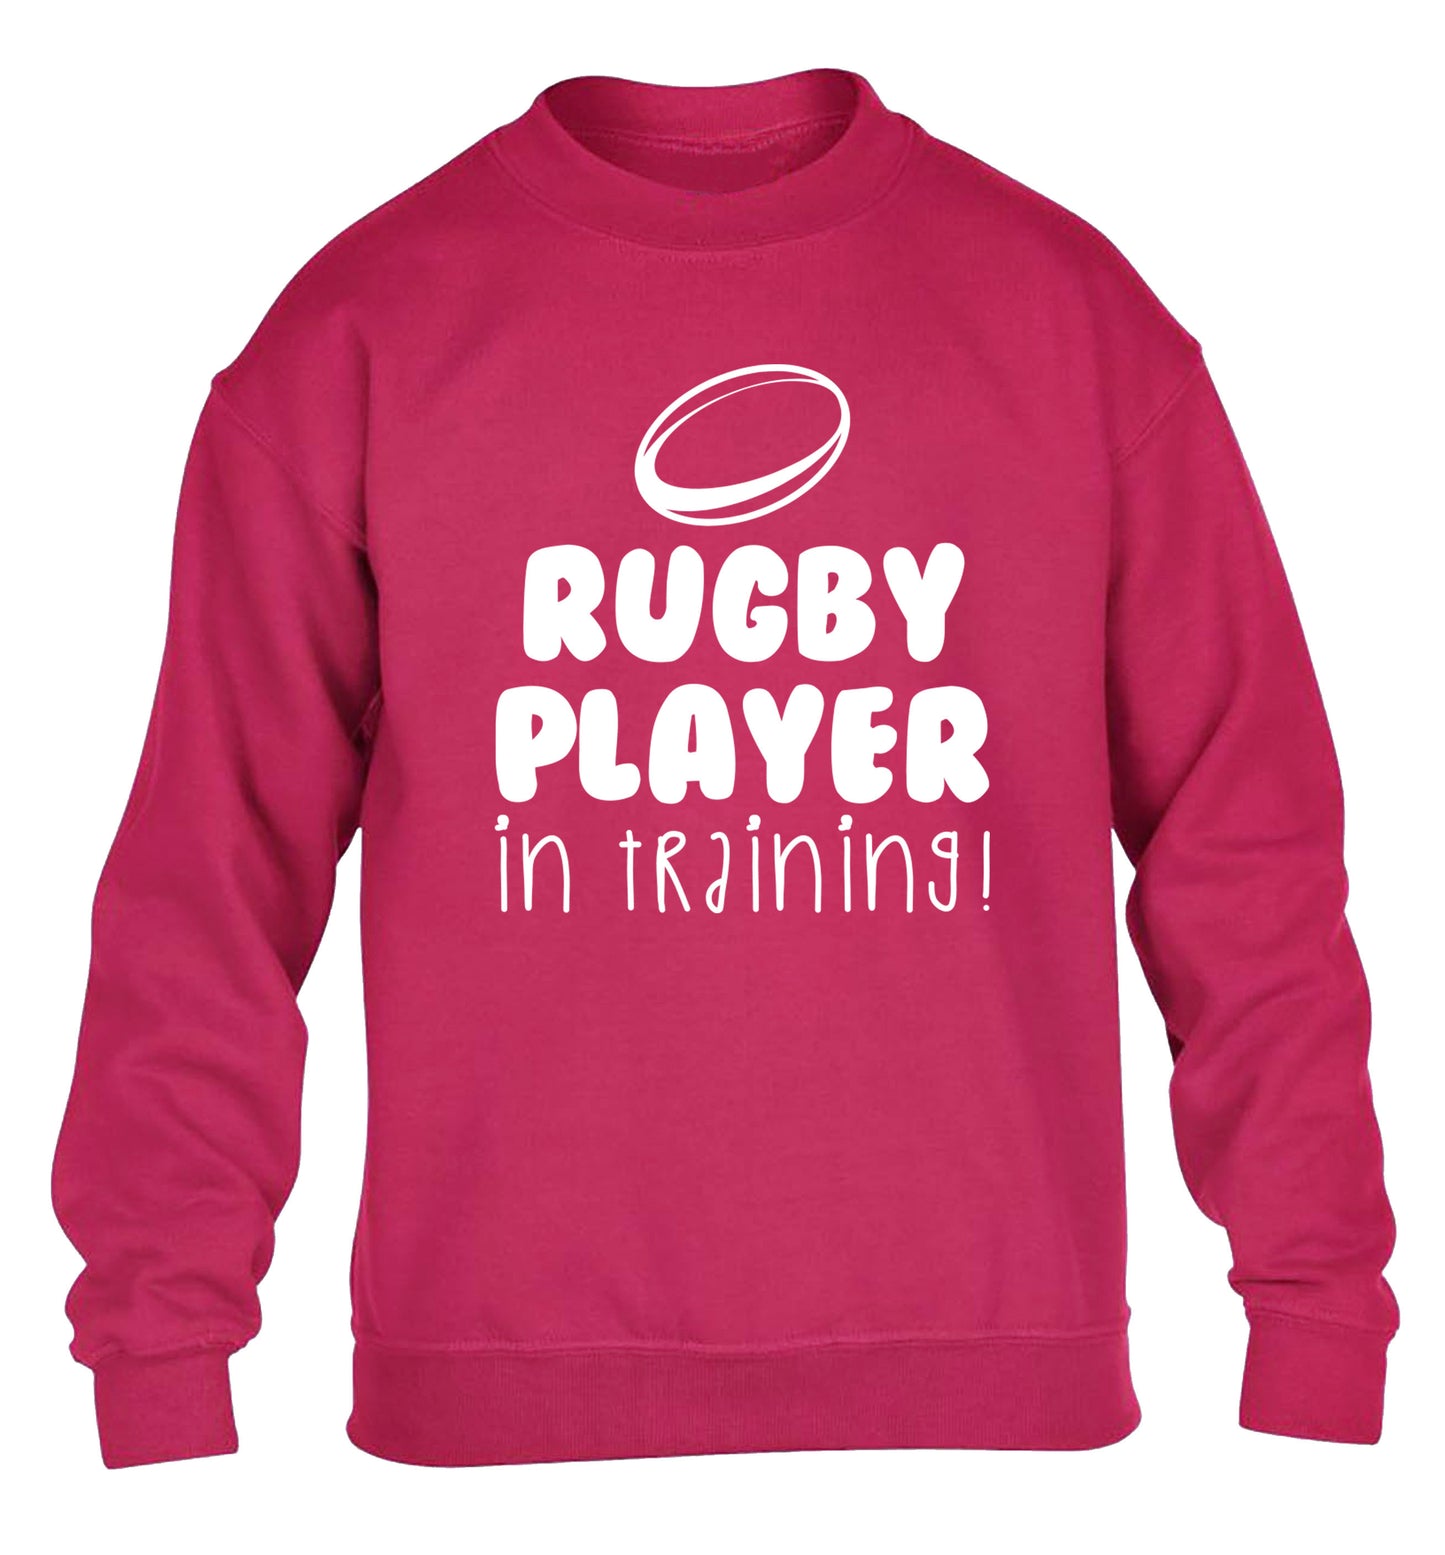 Rugby player in training children's pink sweater 12-14 Years